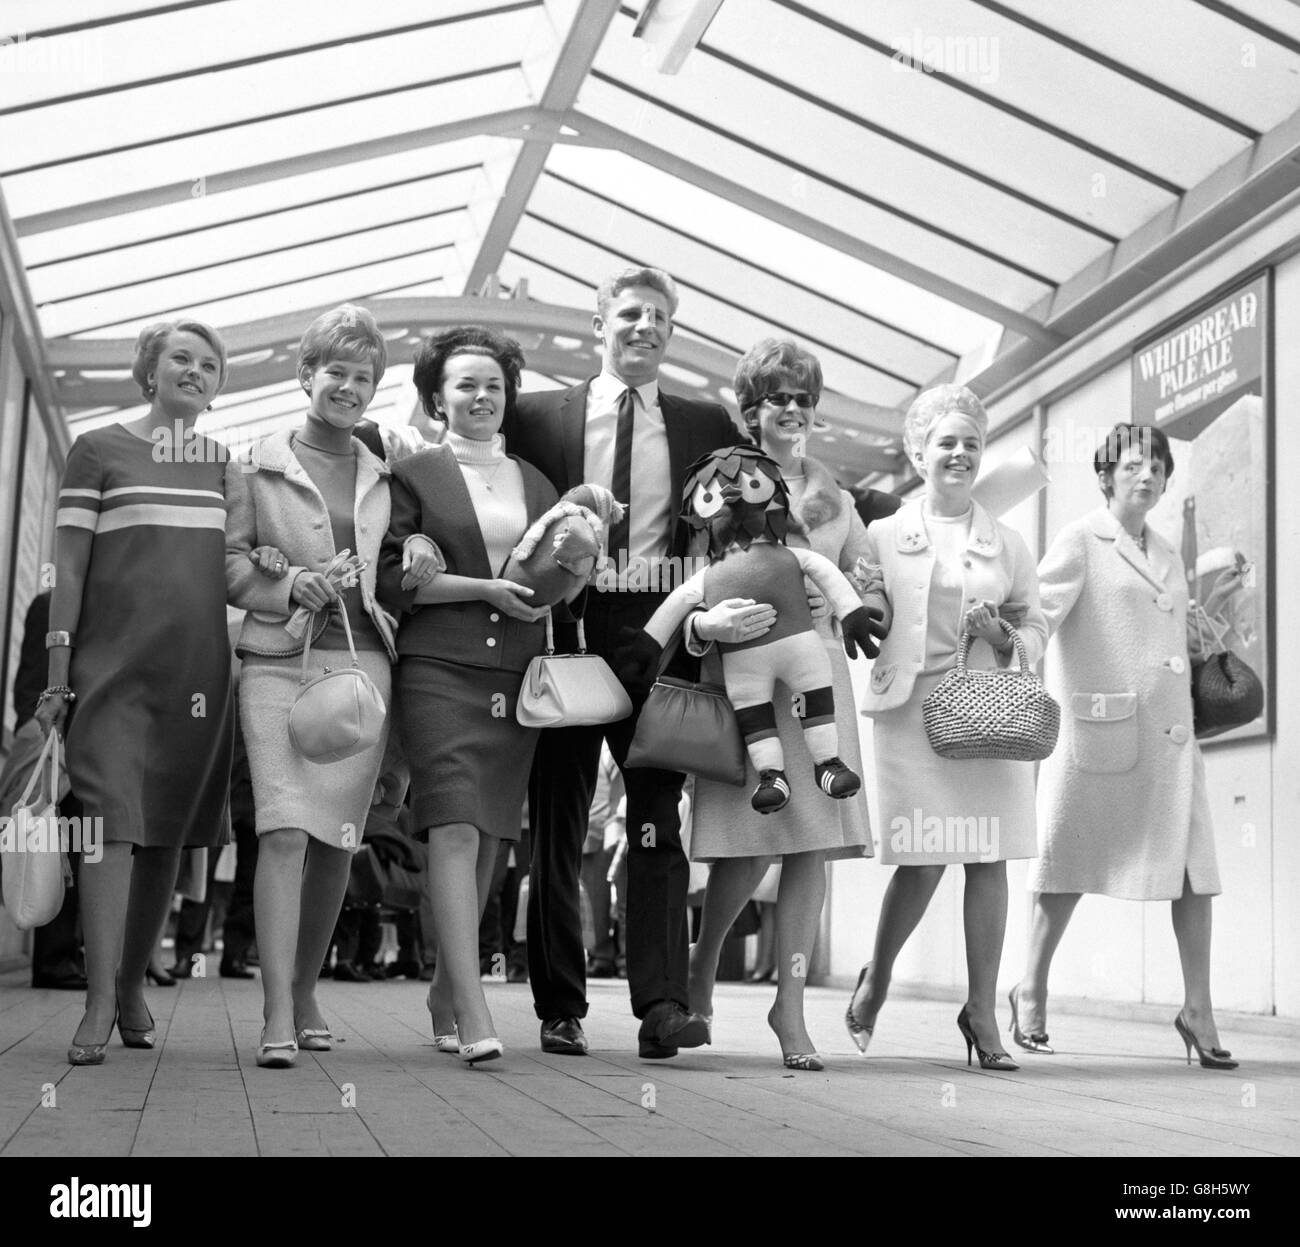 Sheffield Wednesday's Vic Mobley, who will almost certainly be out of the side to meet Everton in the FA Cup final at Wembley tomorrow, is seen leaving Sheffield today with some of the partners of Wednesday players. (l-r) Carol Fantham, Susan Fidler, Barbara Mobley, Vic Mobley, Yvonne Megson, June Quinn and Beryl Young. Stock Photo